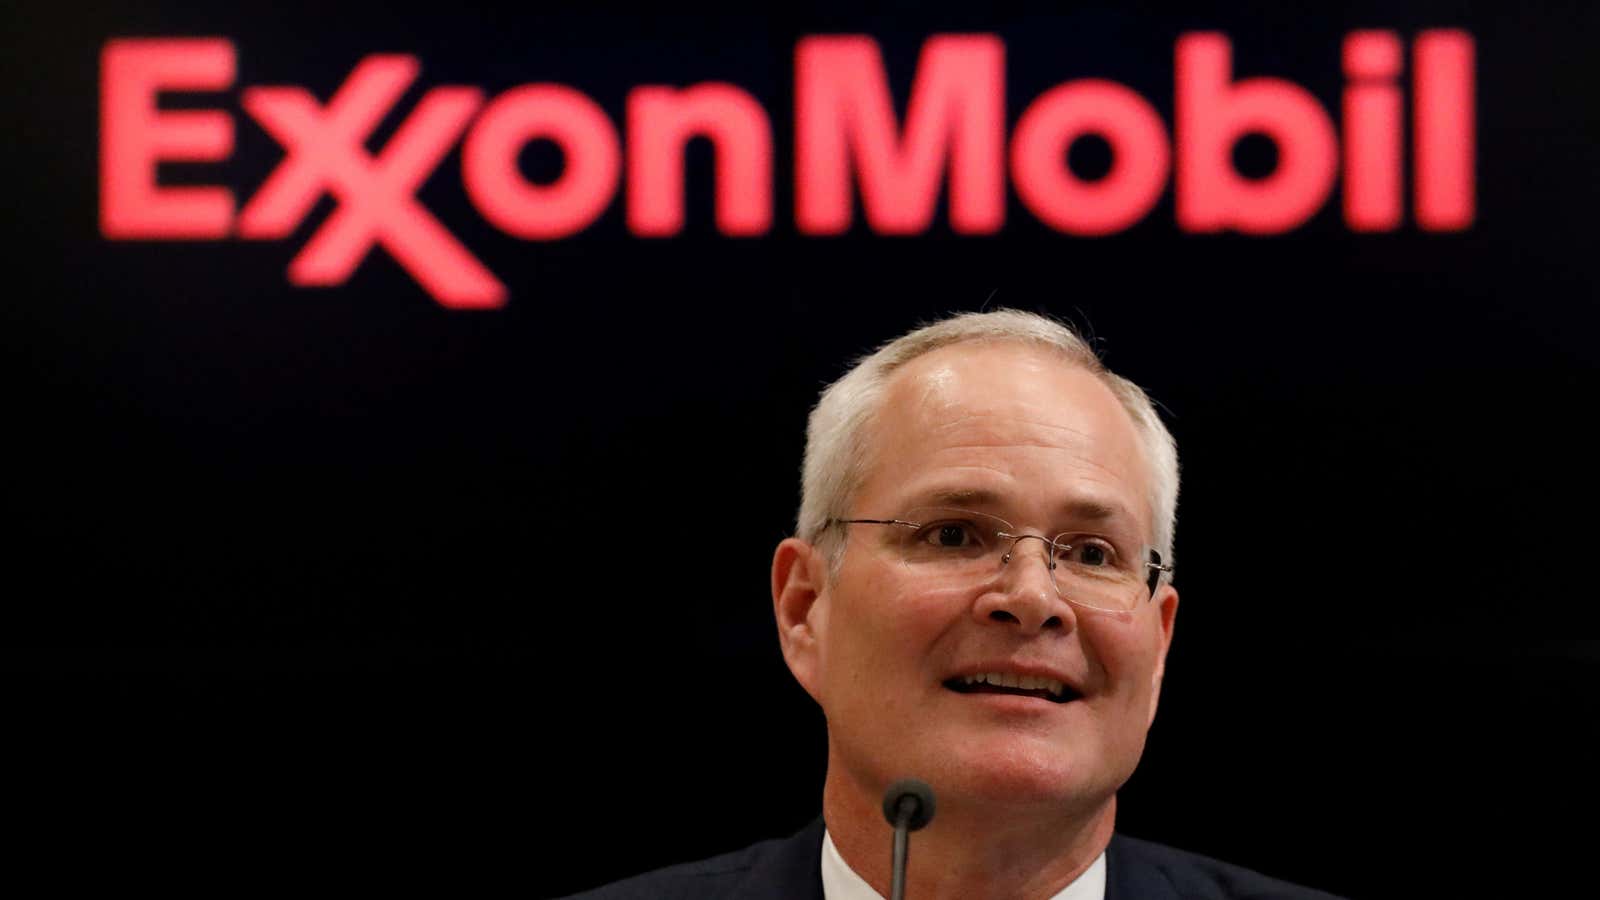 Exxon CEO Darren Woods previously called climate commitments a “beauty competition.” Now it seems he wants a turn on the runway.